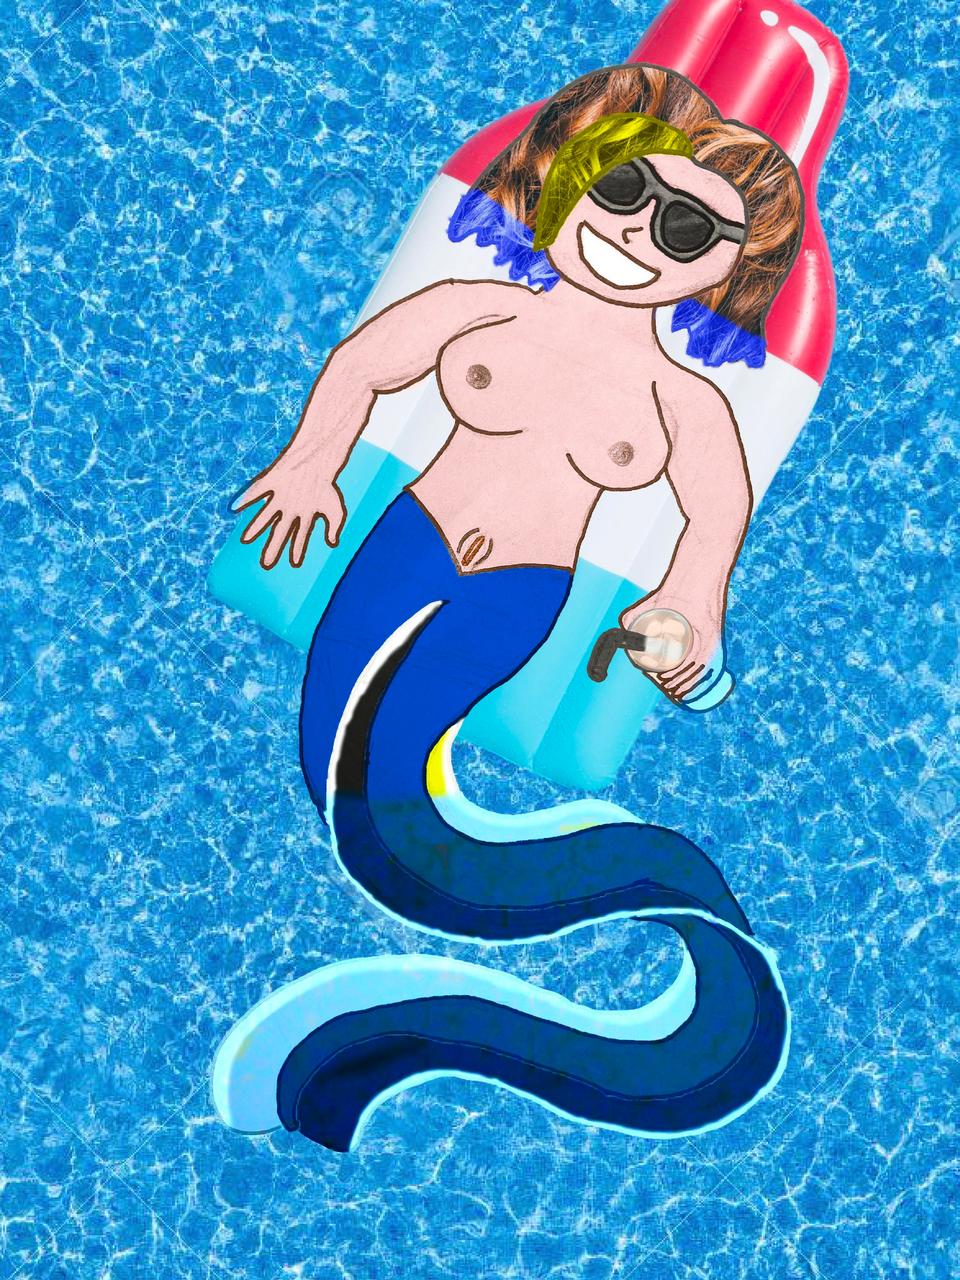 Ribbon Eel Mermaid Chillin In The Pool My First Attempt At Drawing An NSFW Monster Gir